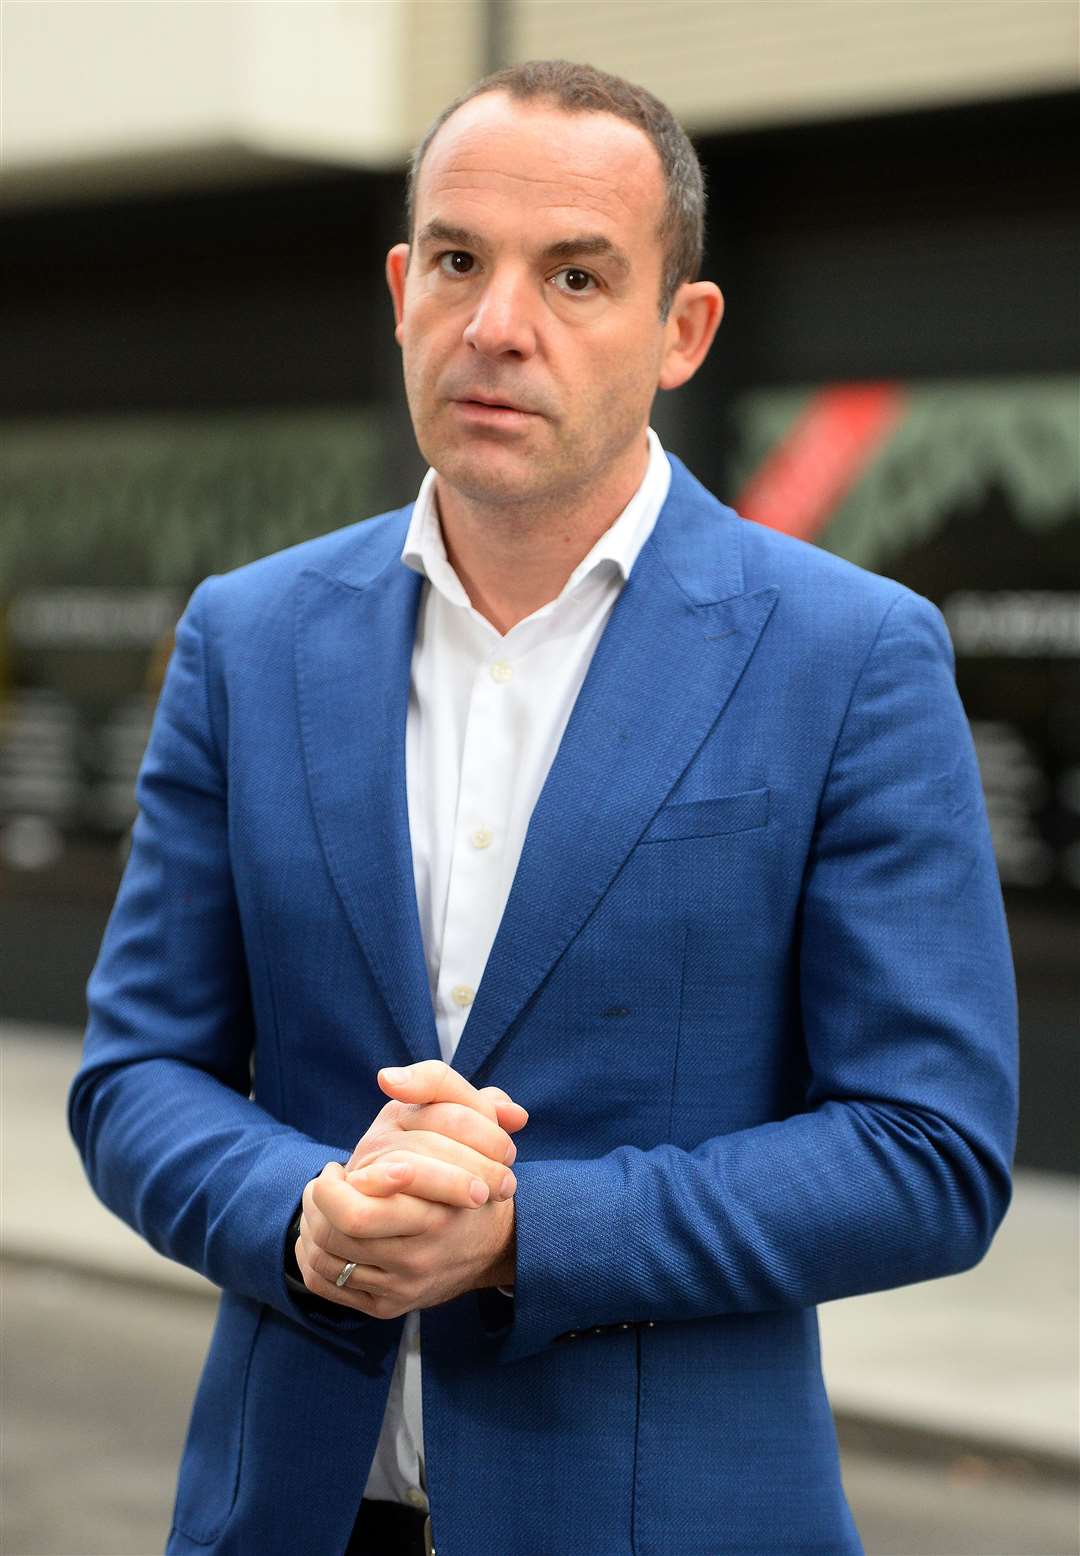 Martin Lewis has been made a CBE for services to broadcasting and consumer rights (Kirsty O’Connor/PA)